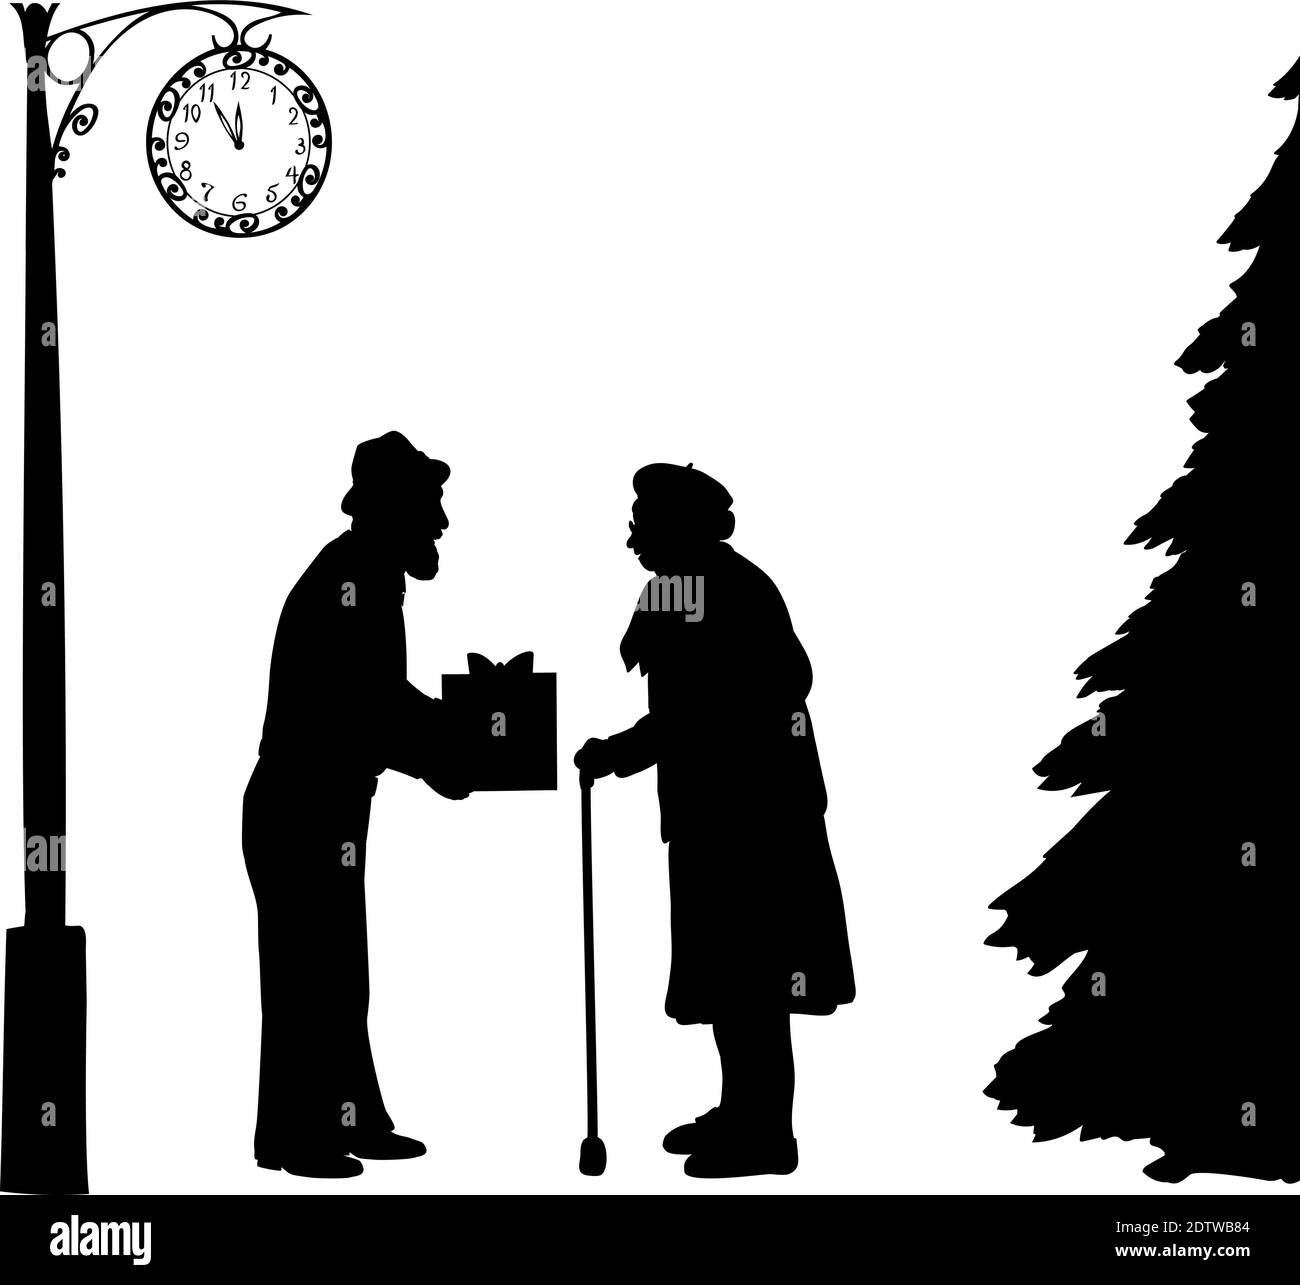 Silhouettes grandfather gives grandmother present at the clock and Christmas tree. Illustration symbol icon Stock Vector